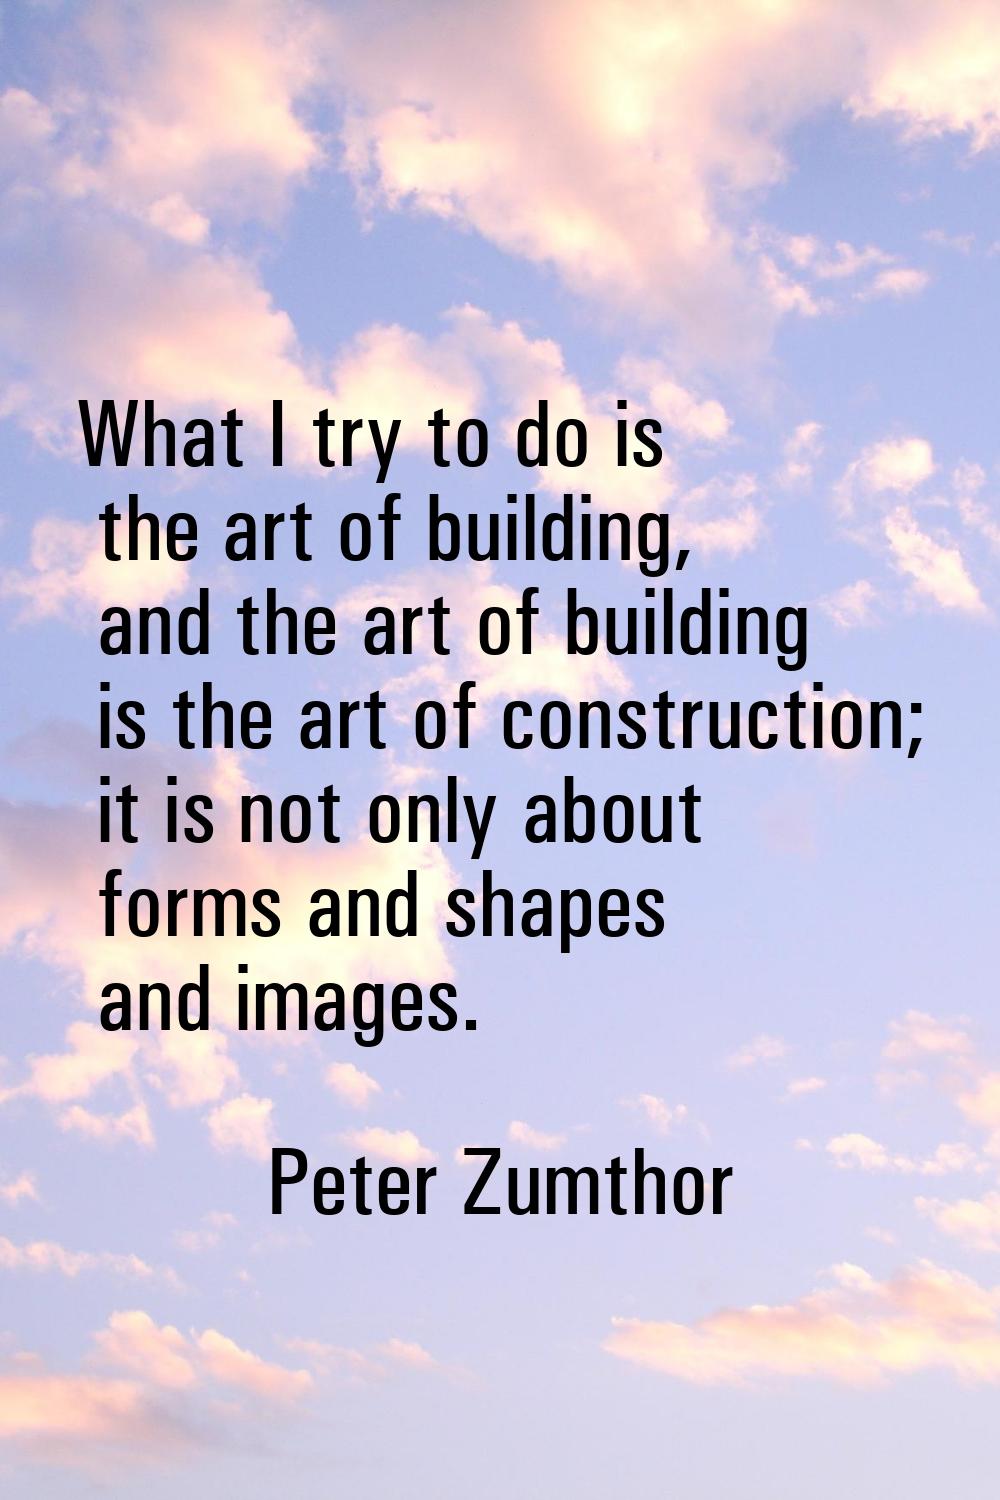 What I try to do is the art of building, and the art of building is the art of construction; it is 